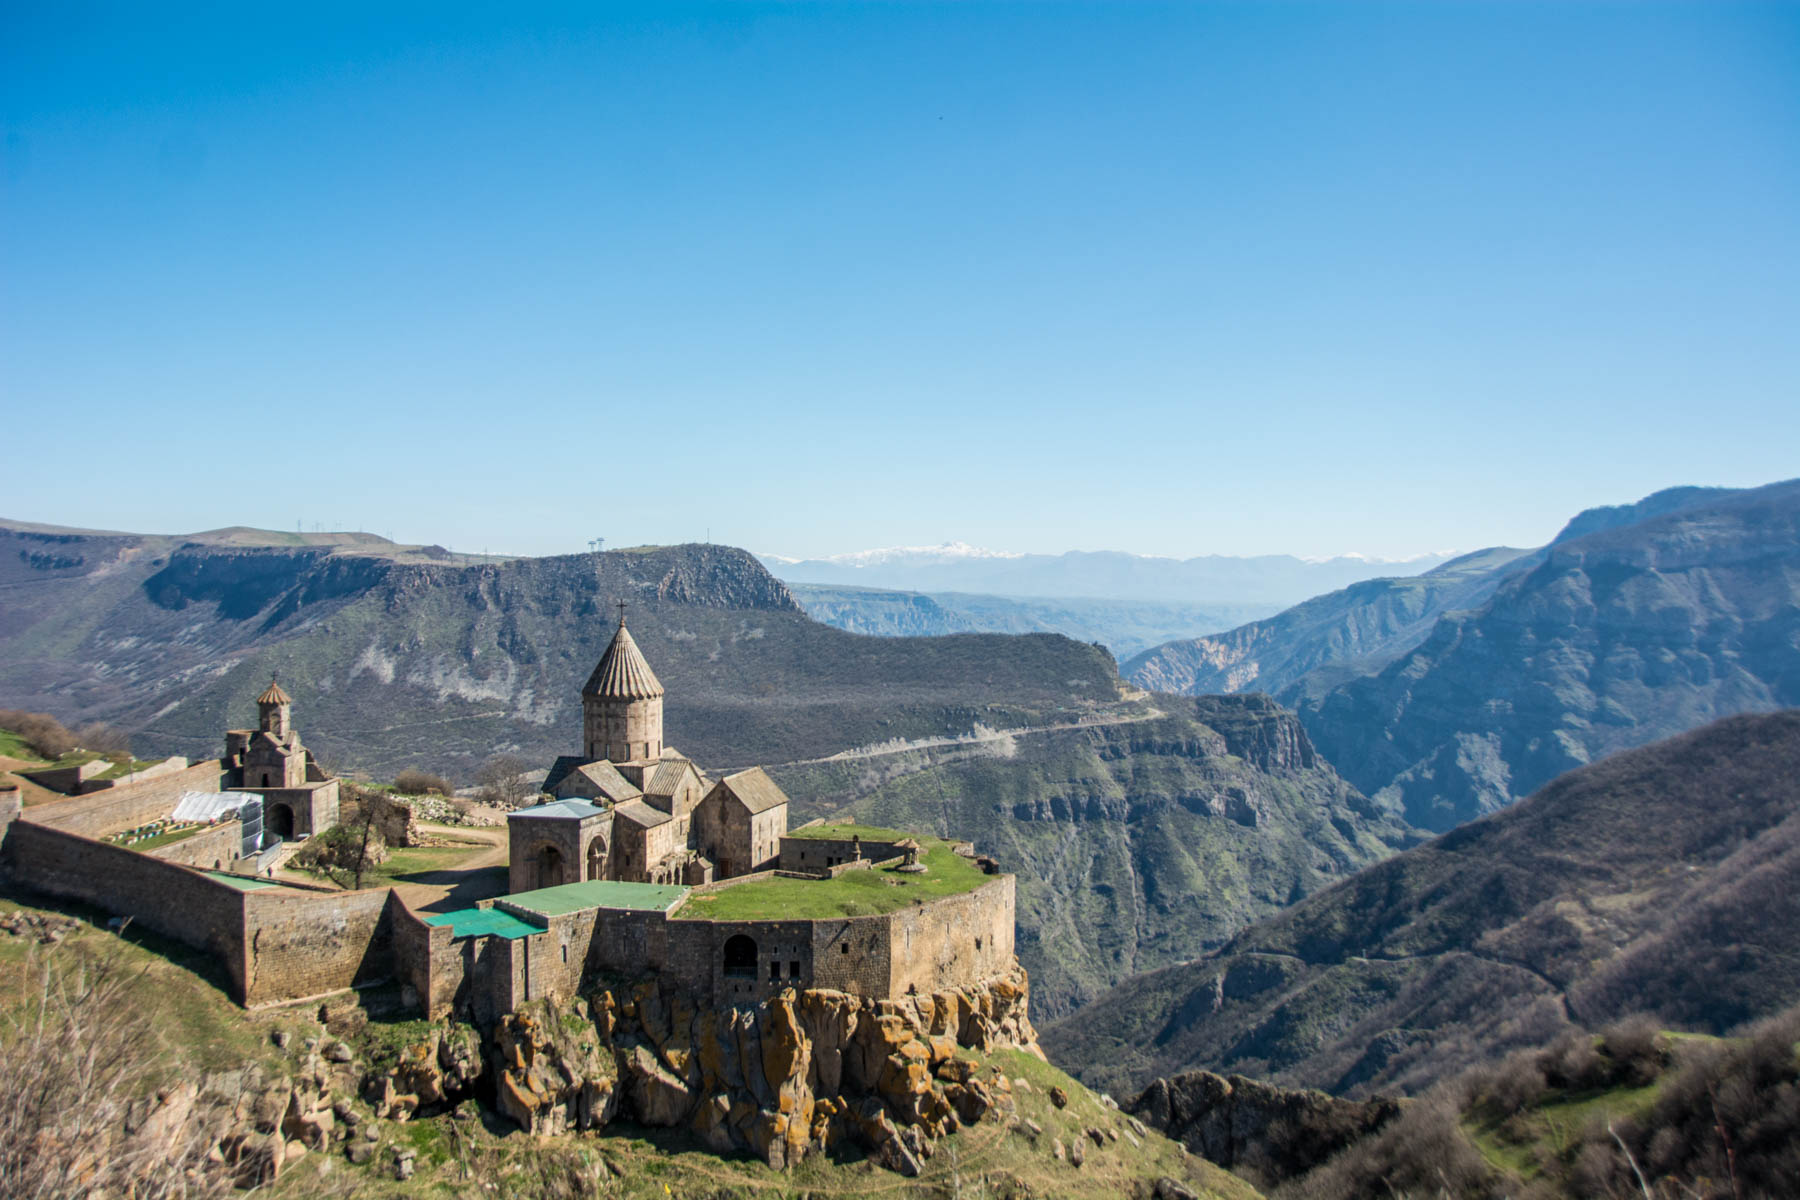 Why visit Armenia: The breathtaking monastery of Tatev, one of the most famous historical sites in Armenia.